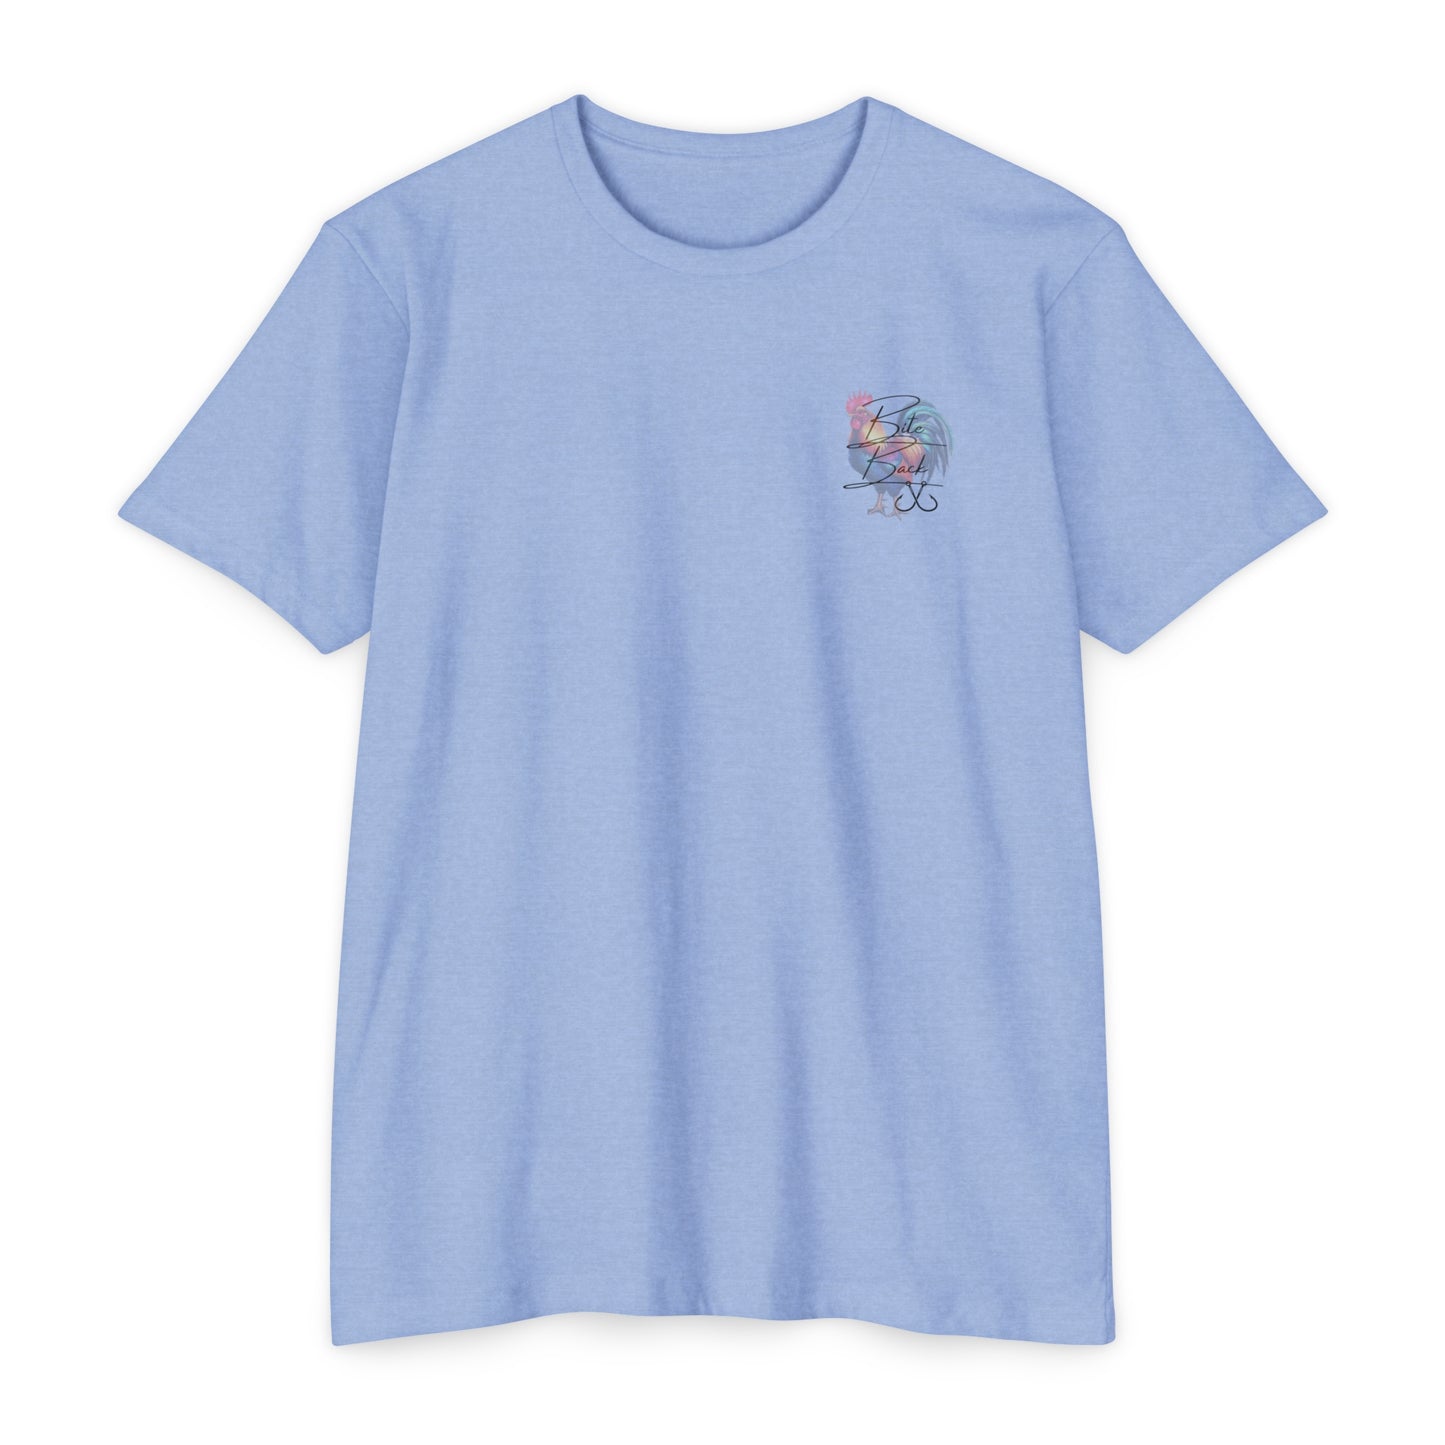 Key West Rooster T-shirt